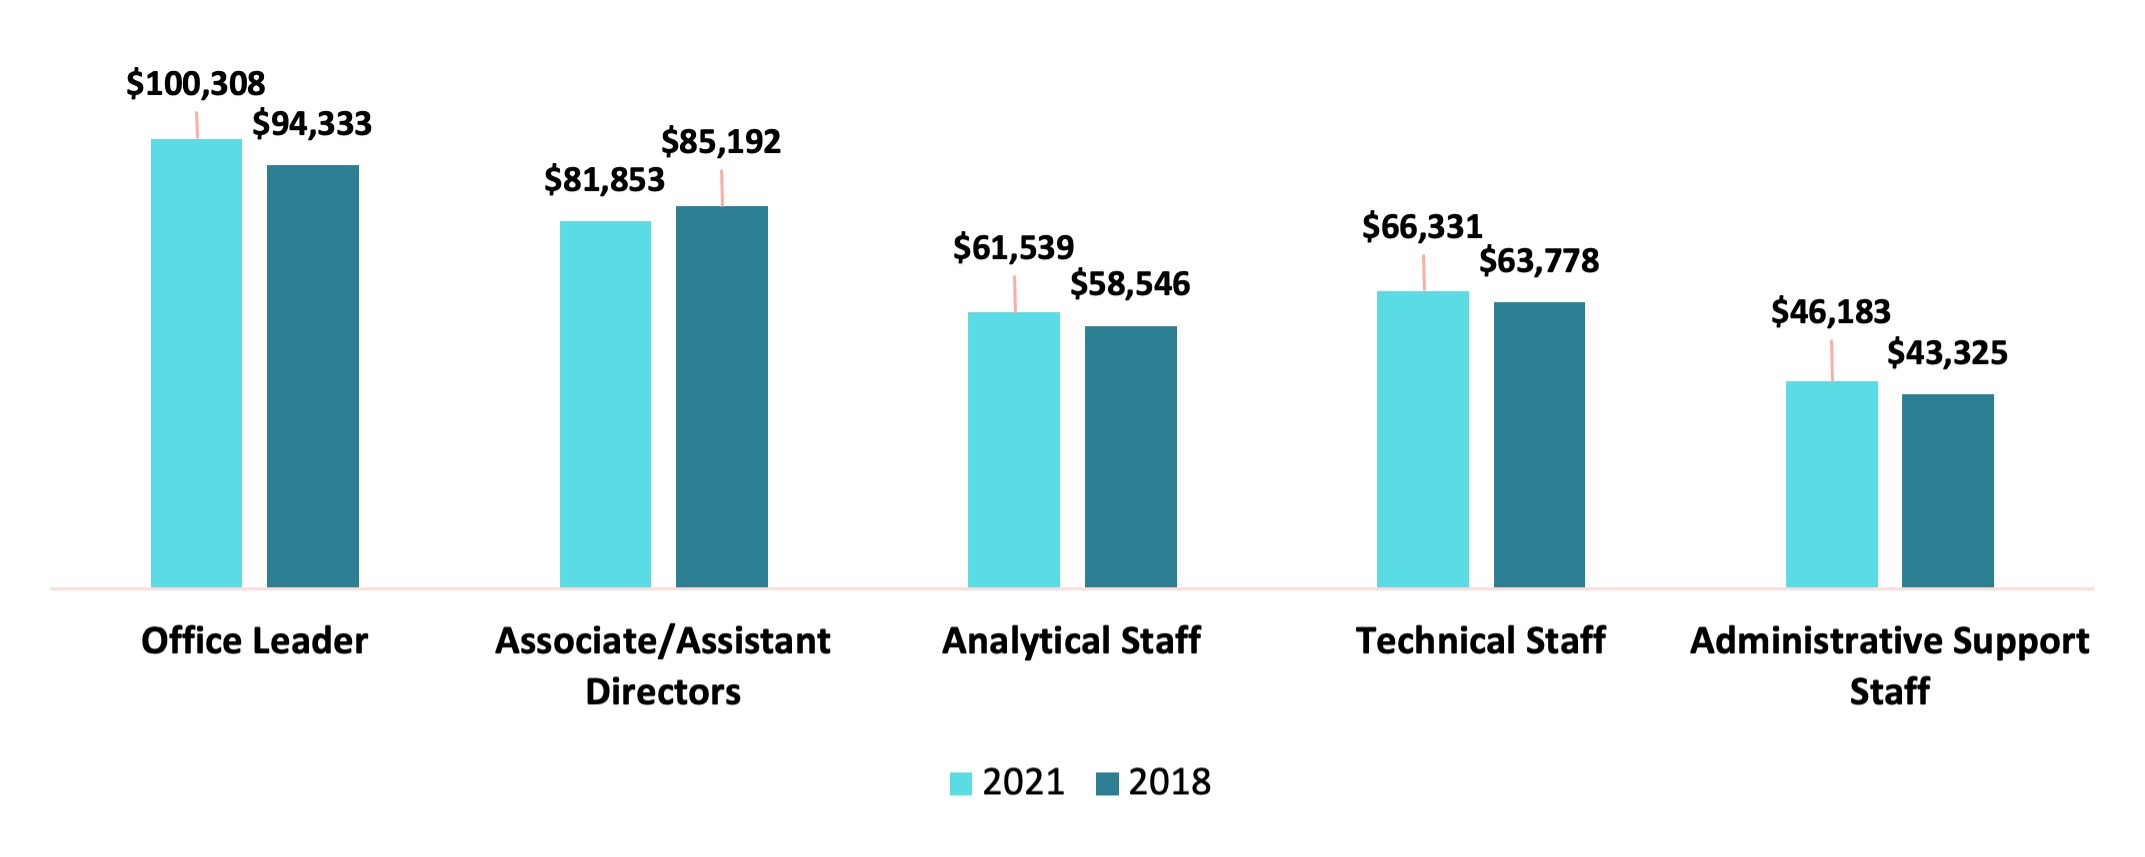 Chart 3 - Changes in Staff Salaries-2018 to 2021